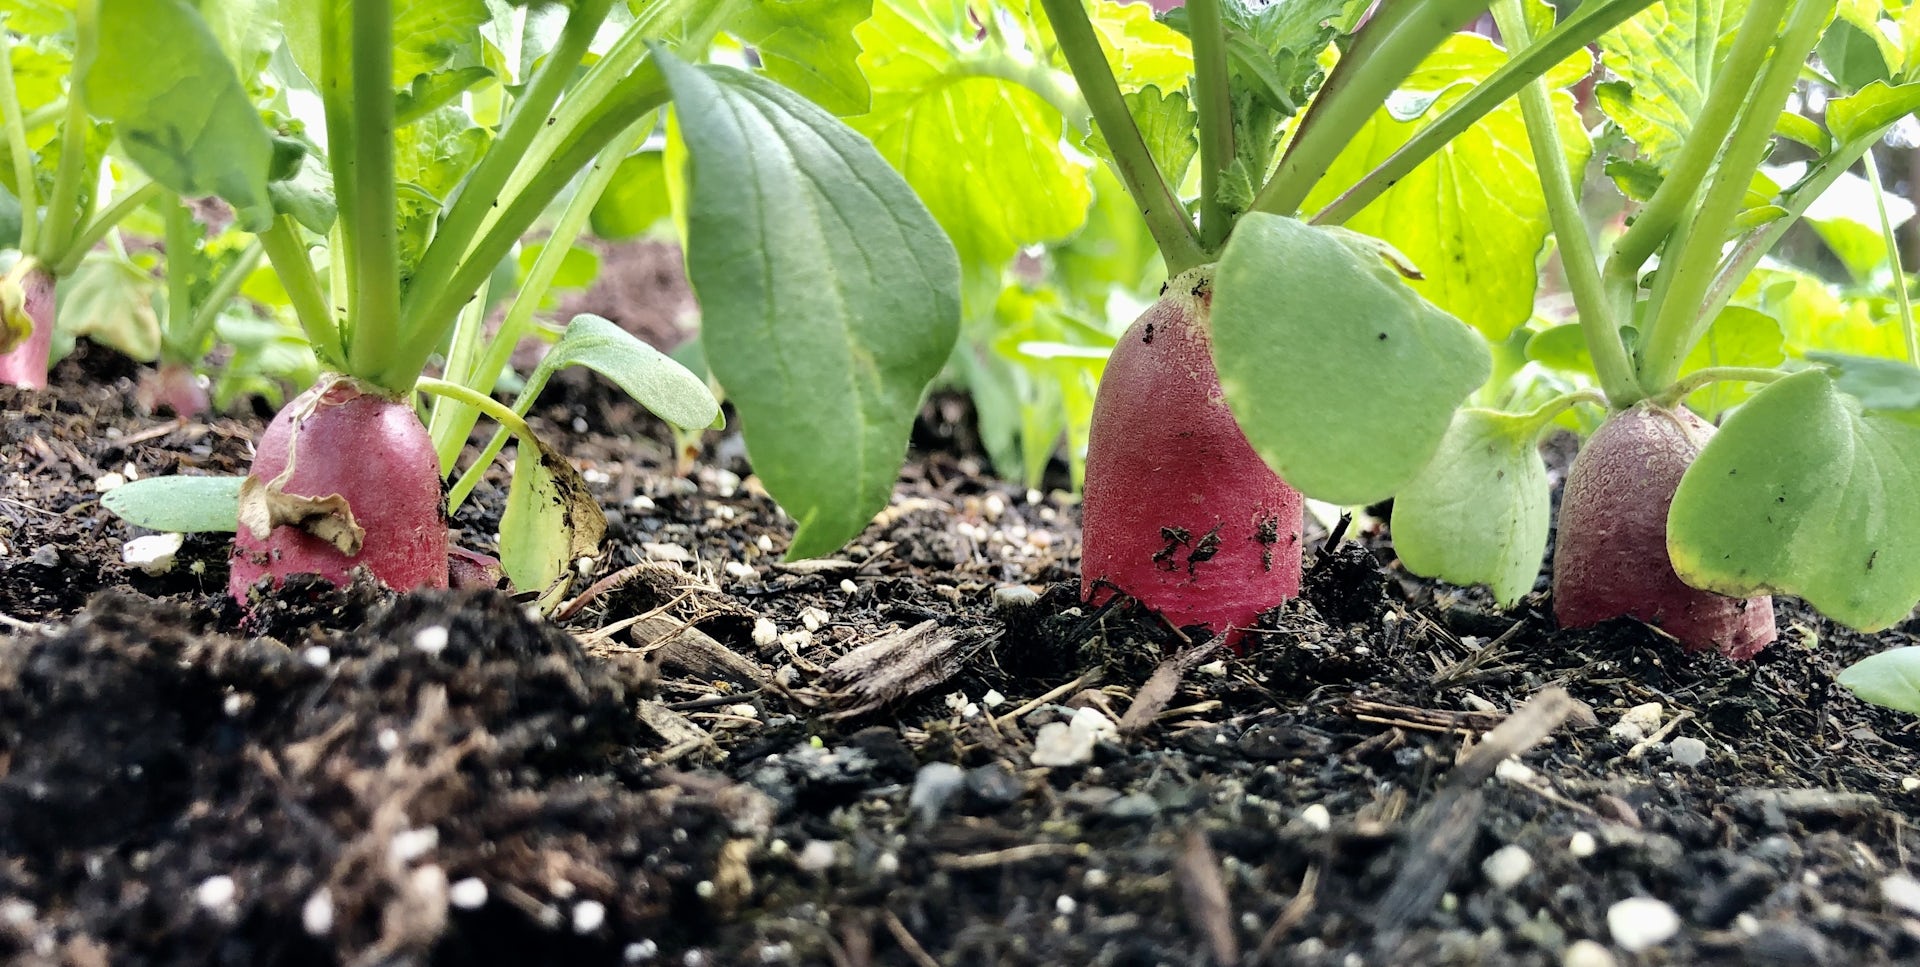 Radishes growing in soil with their red roots partially exposed above ground.